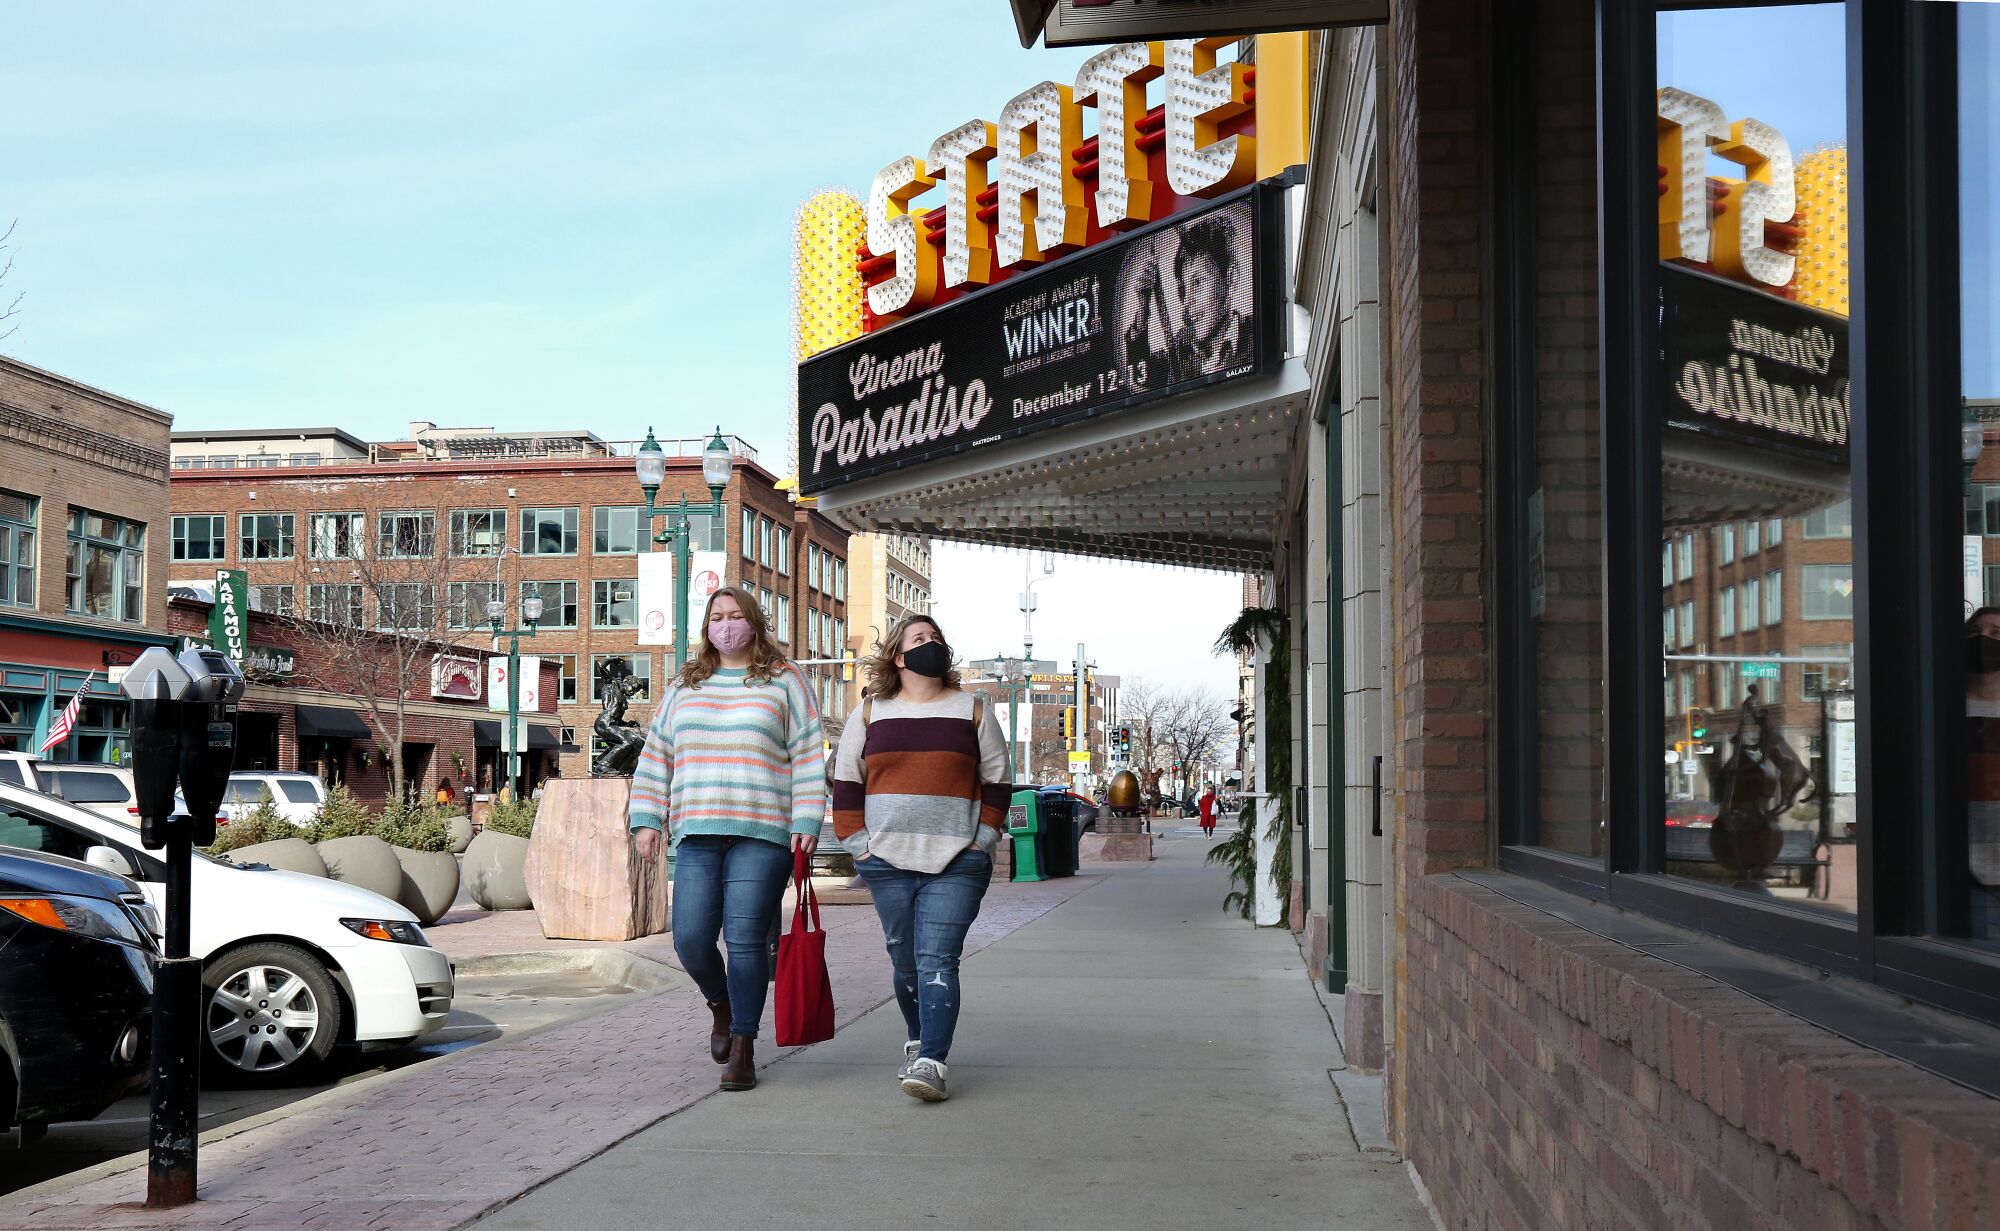 Residents walk along Phillips Ave, a main commercial street in downtown Sioux Falls.